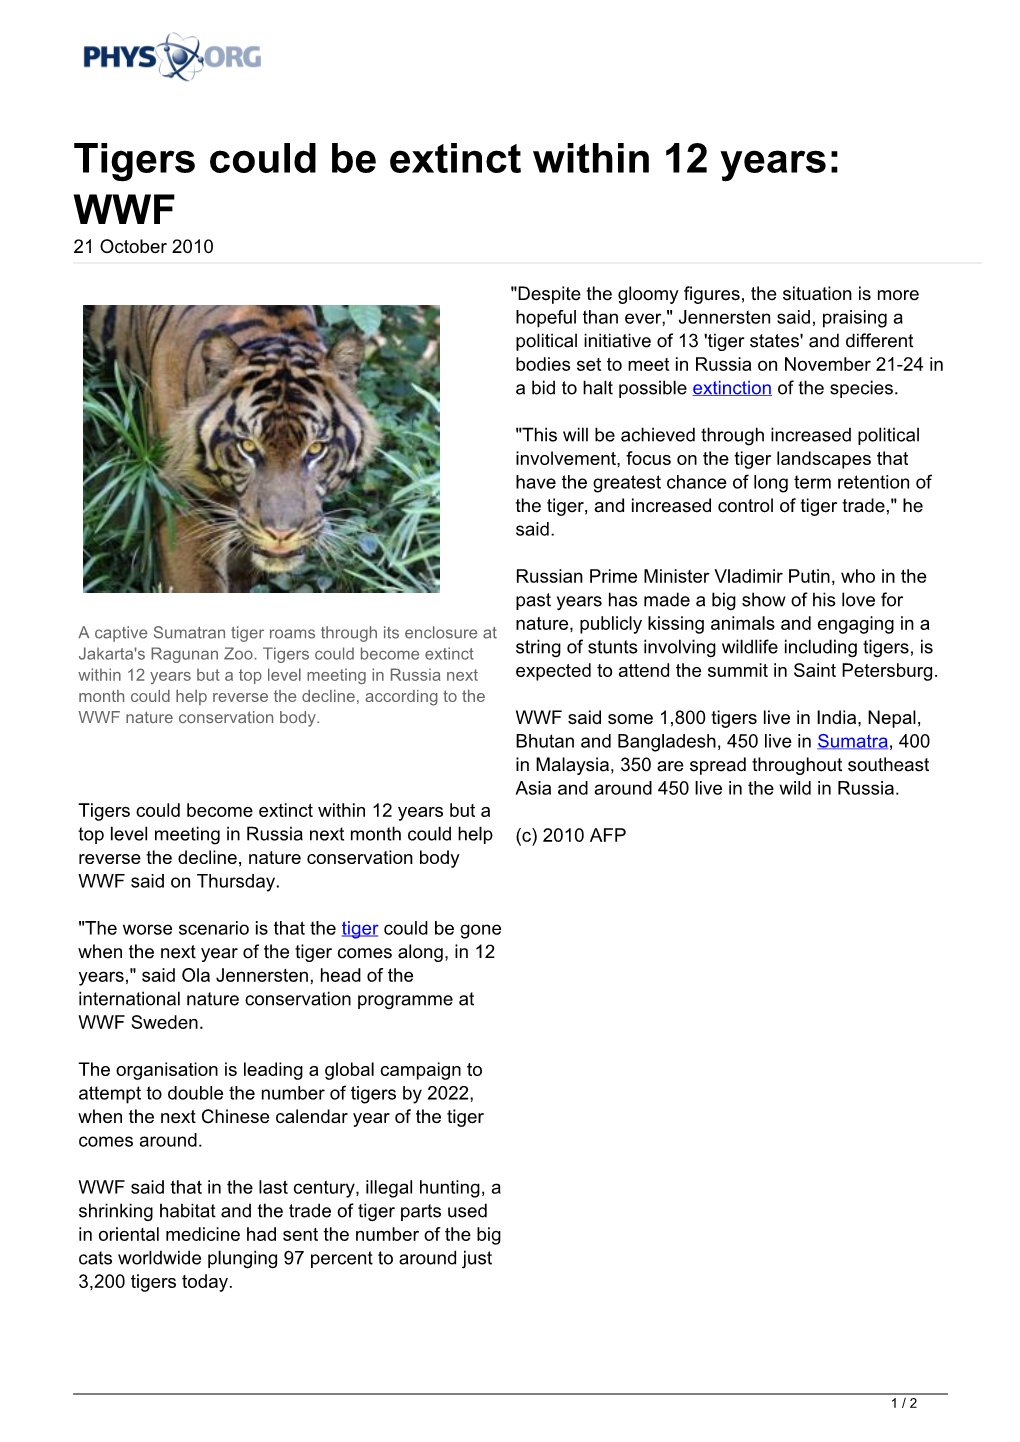 Tigers Could Be Extinct Within 12 Years: WWF 21 October 2010